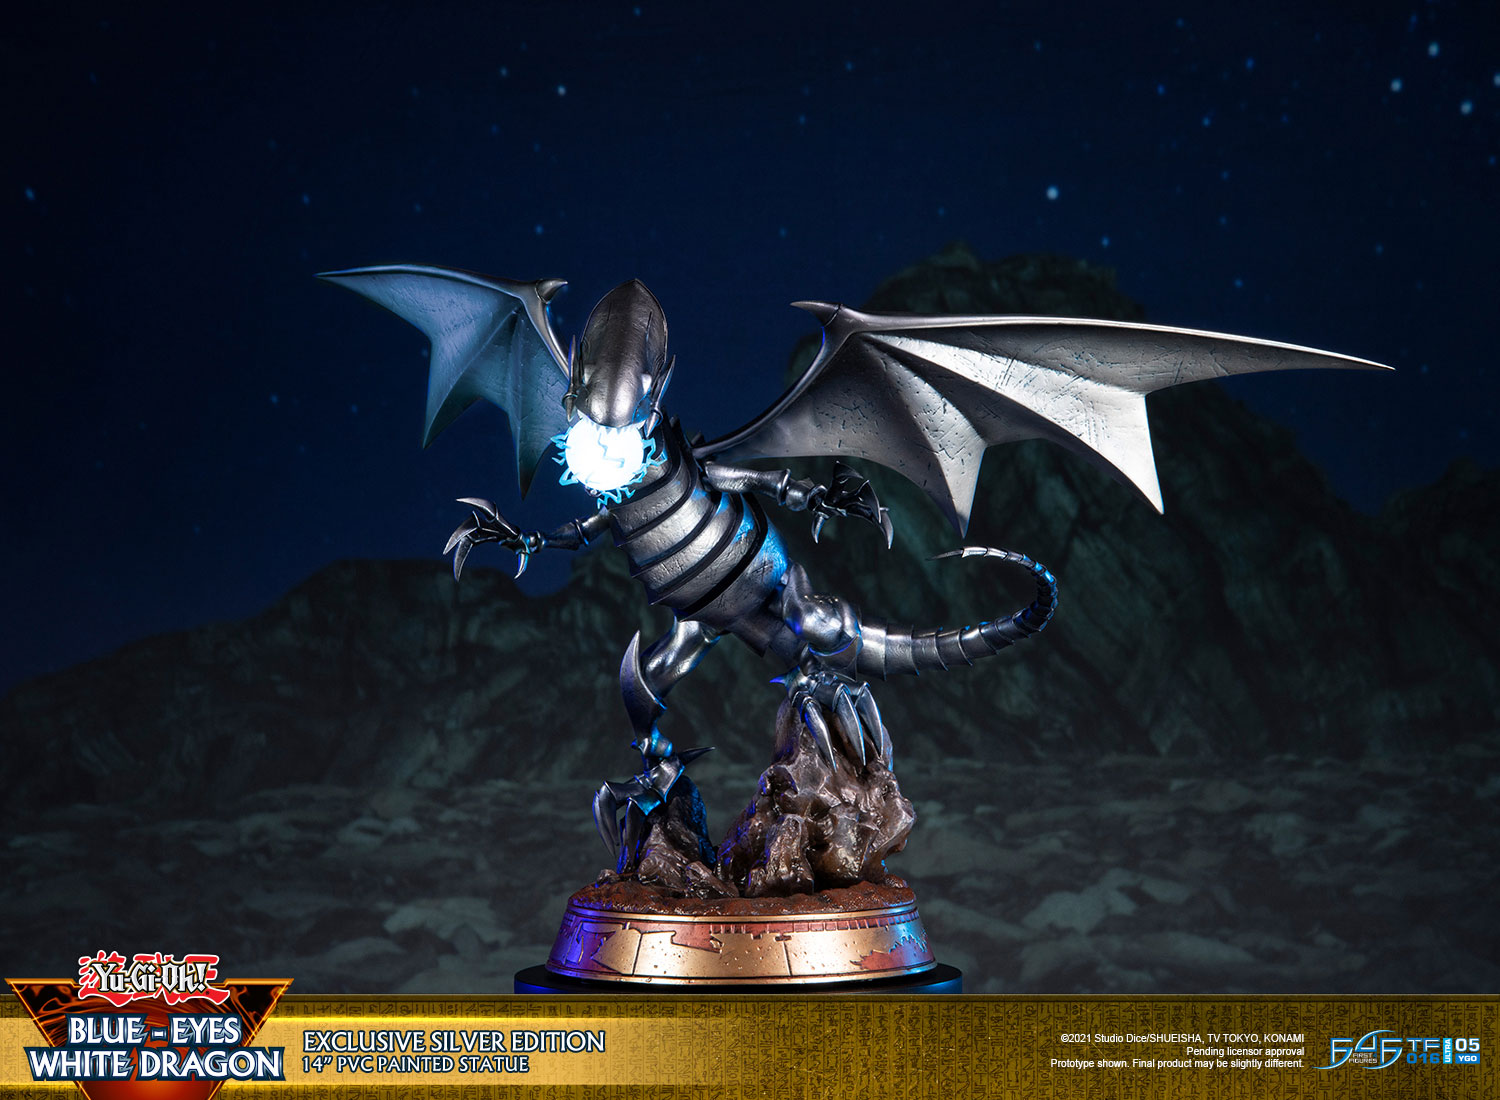 Blue-Eyes White Dragon (Exclusive Silver Edition)